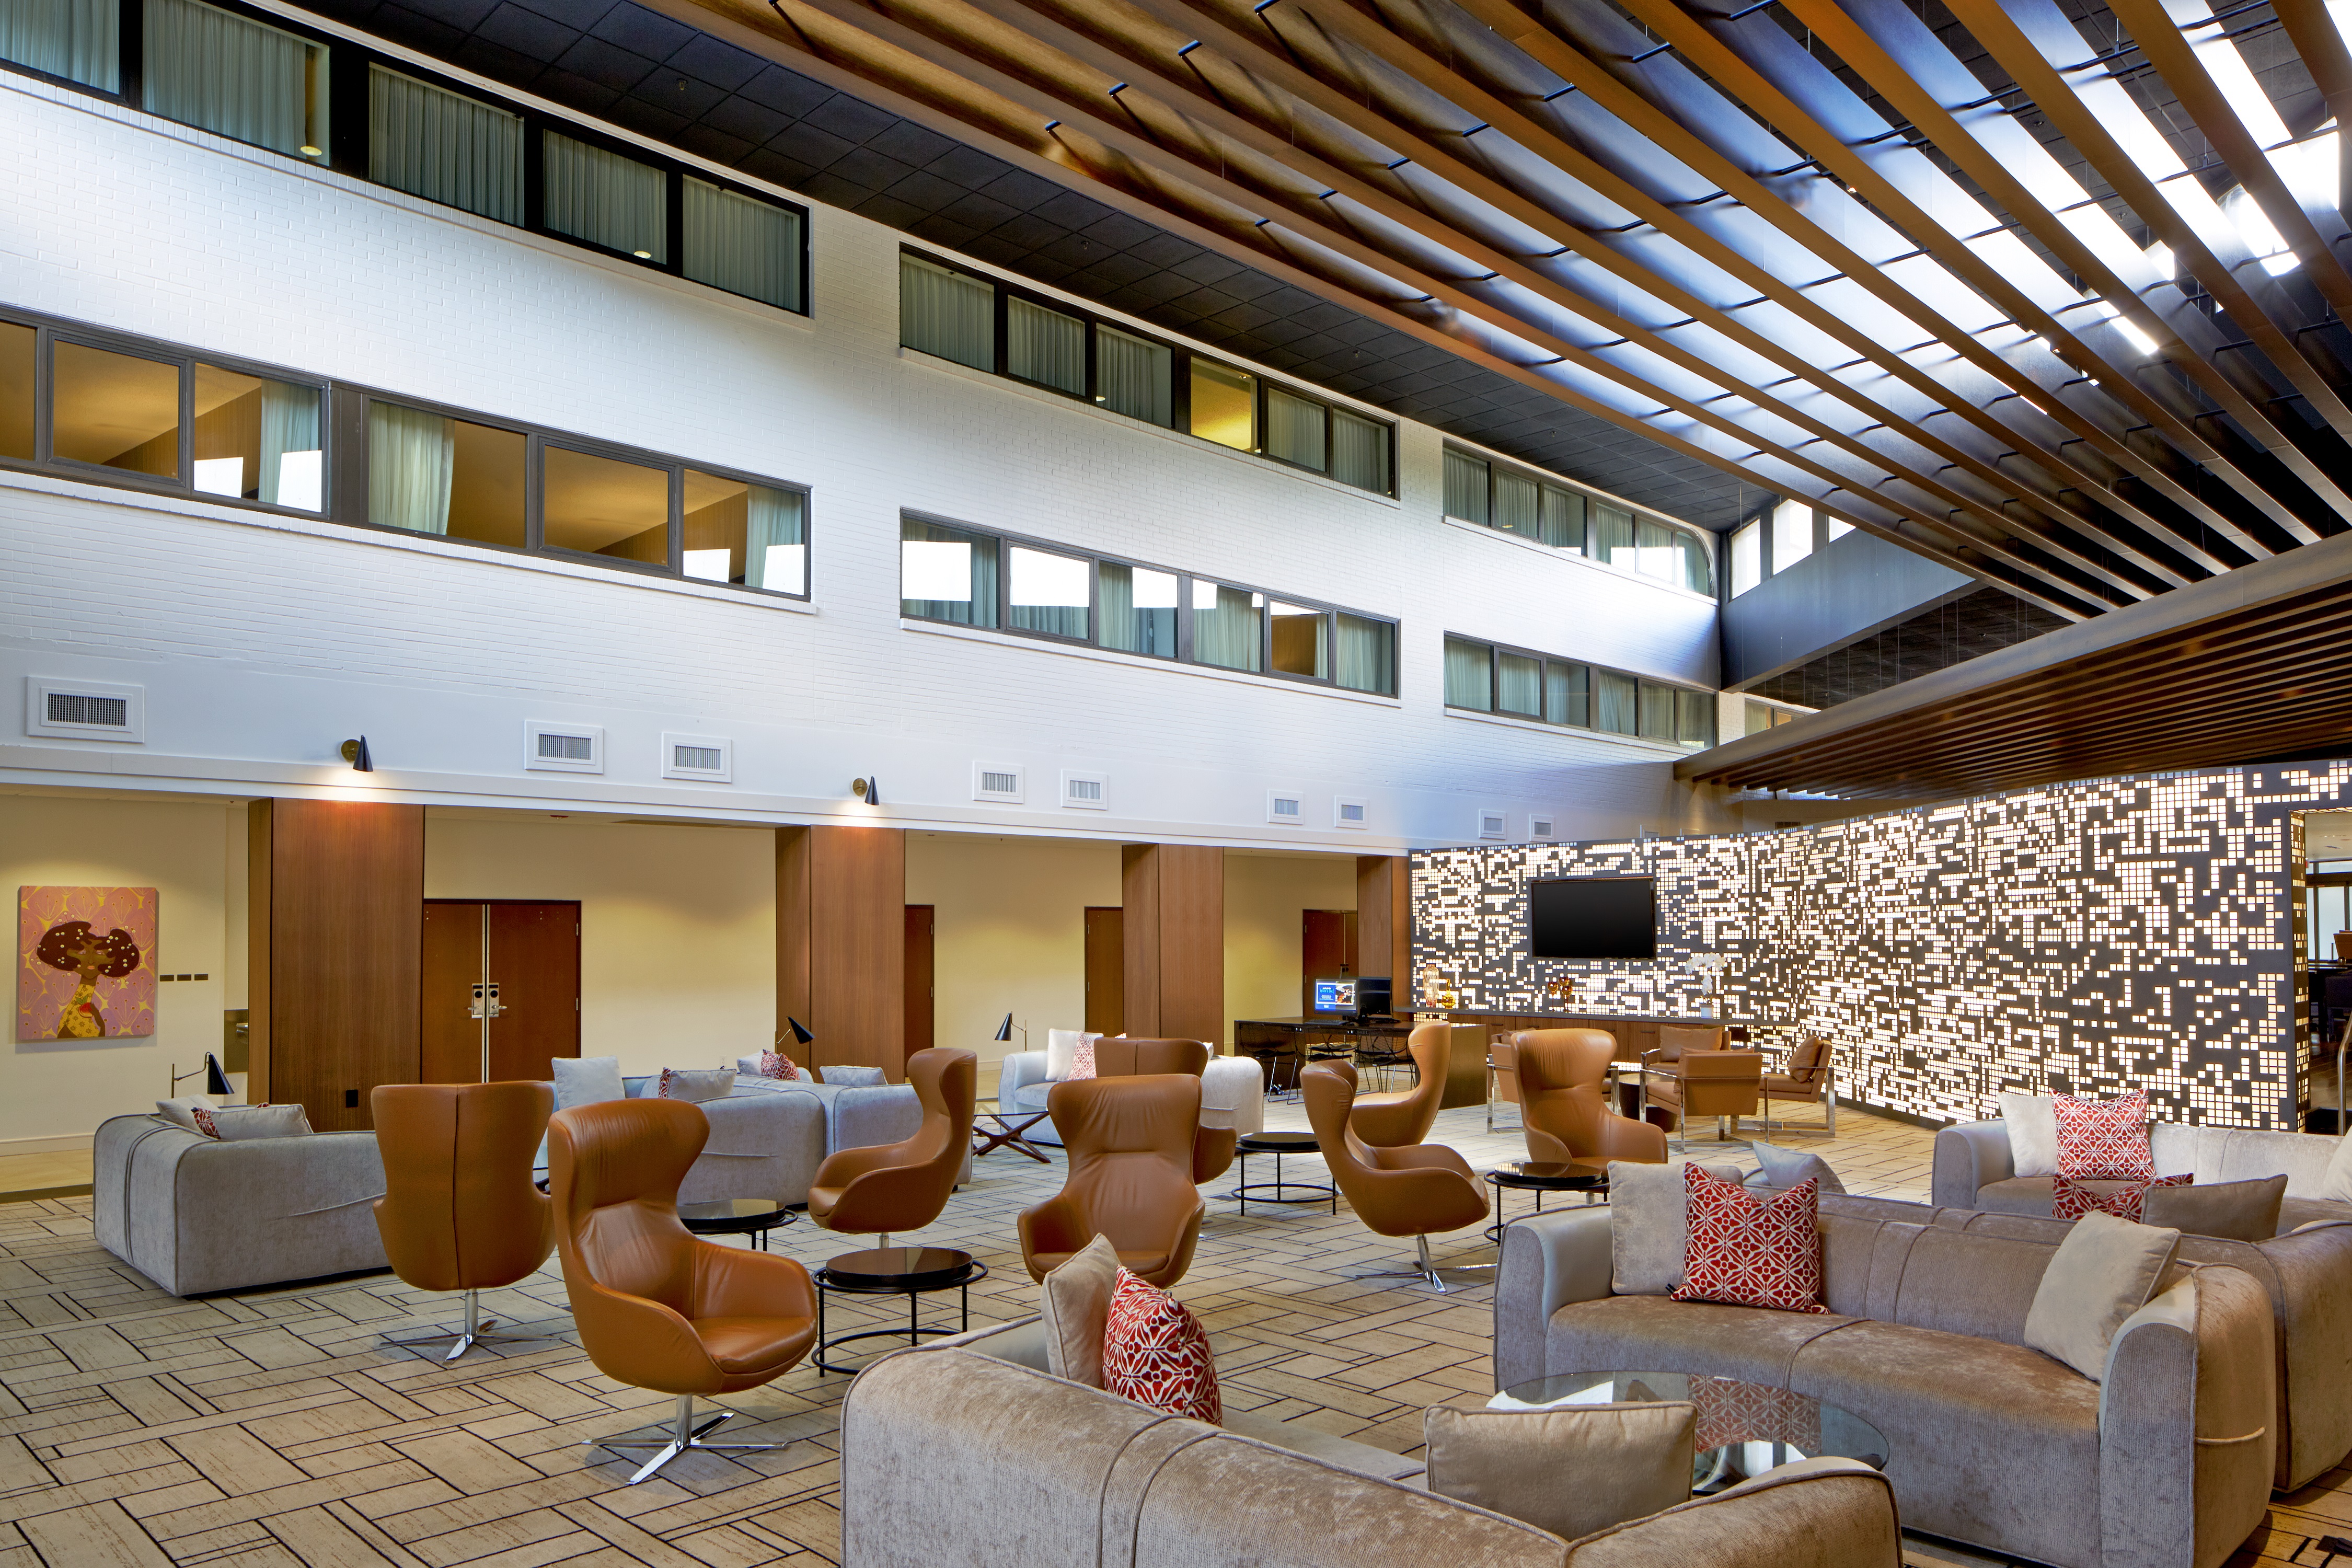 Vast Atrium With Lounge Seating and View of Business Center